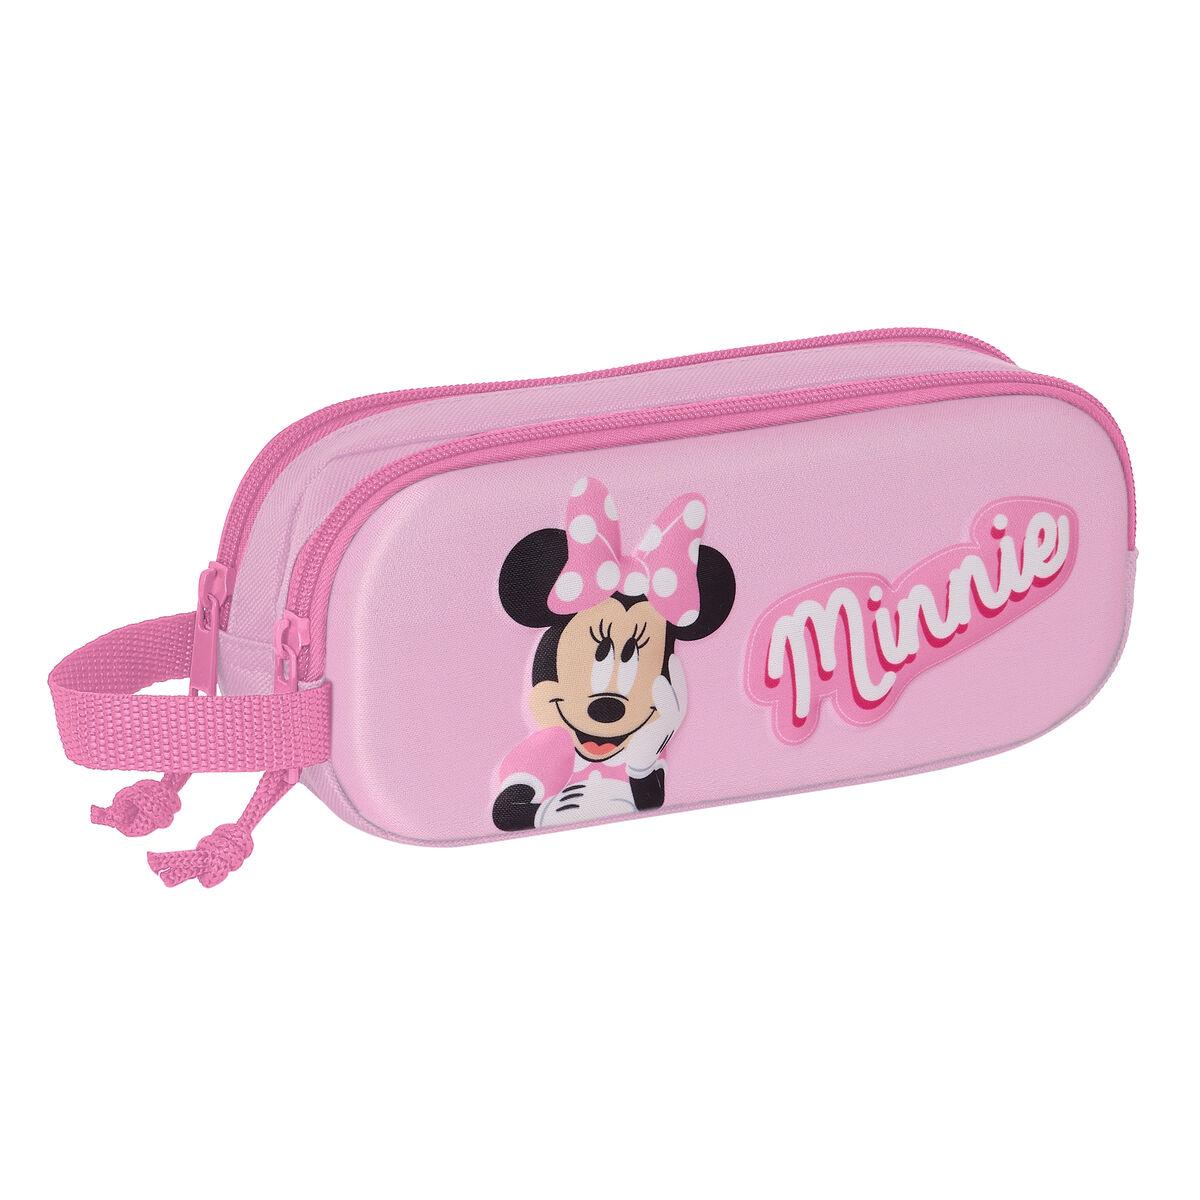 Dobbelt carry-all Minnie Mouse 3D Pink 21 x 8 x 6 cm